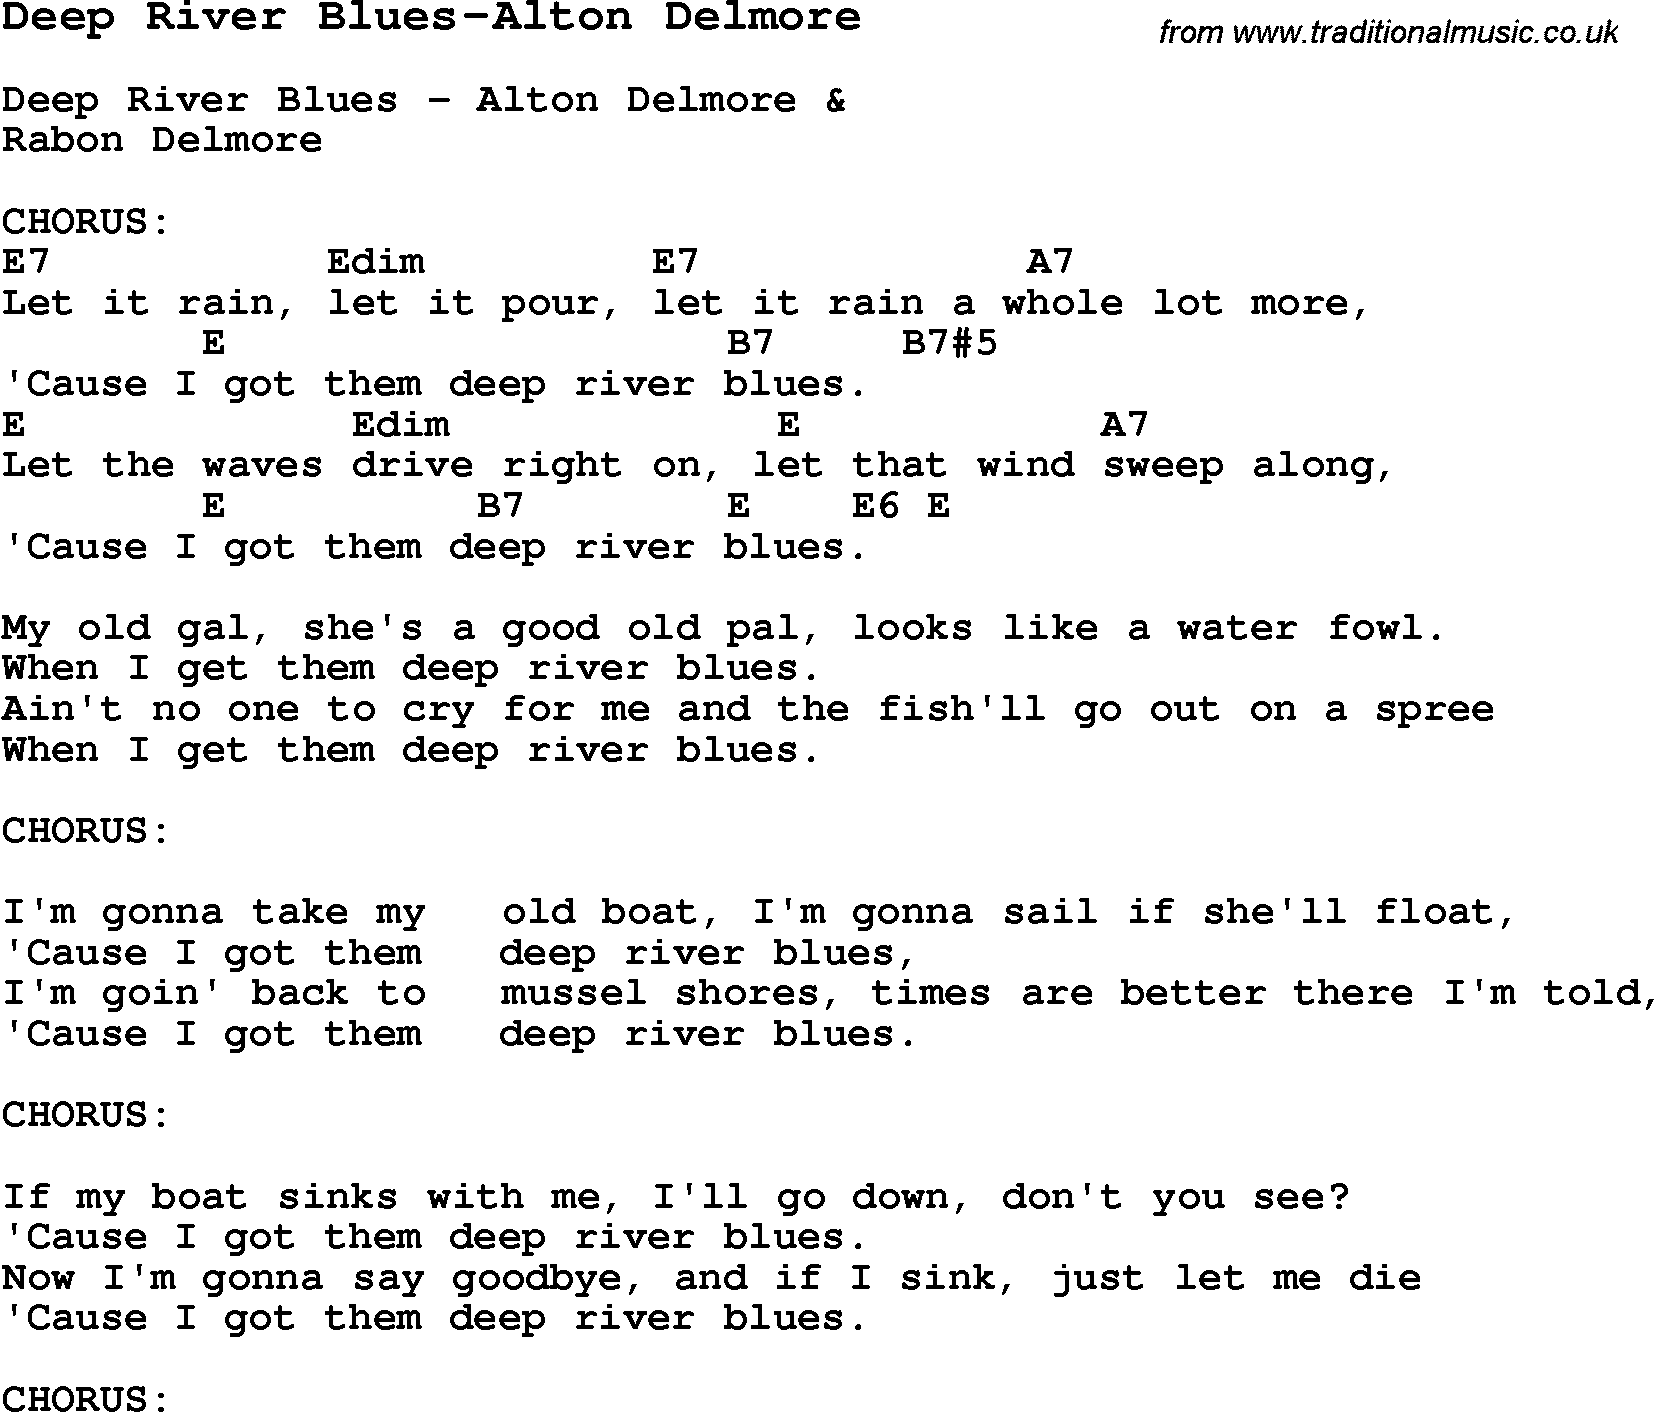 Blues Guitar Song, lyrics, chords, tablature, playing hints for Deep River Blues...